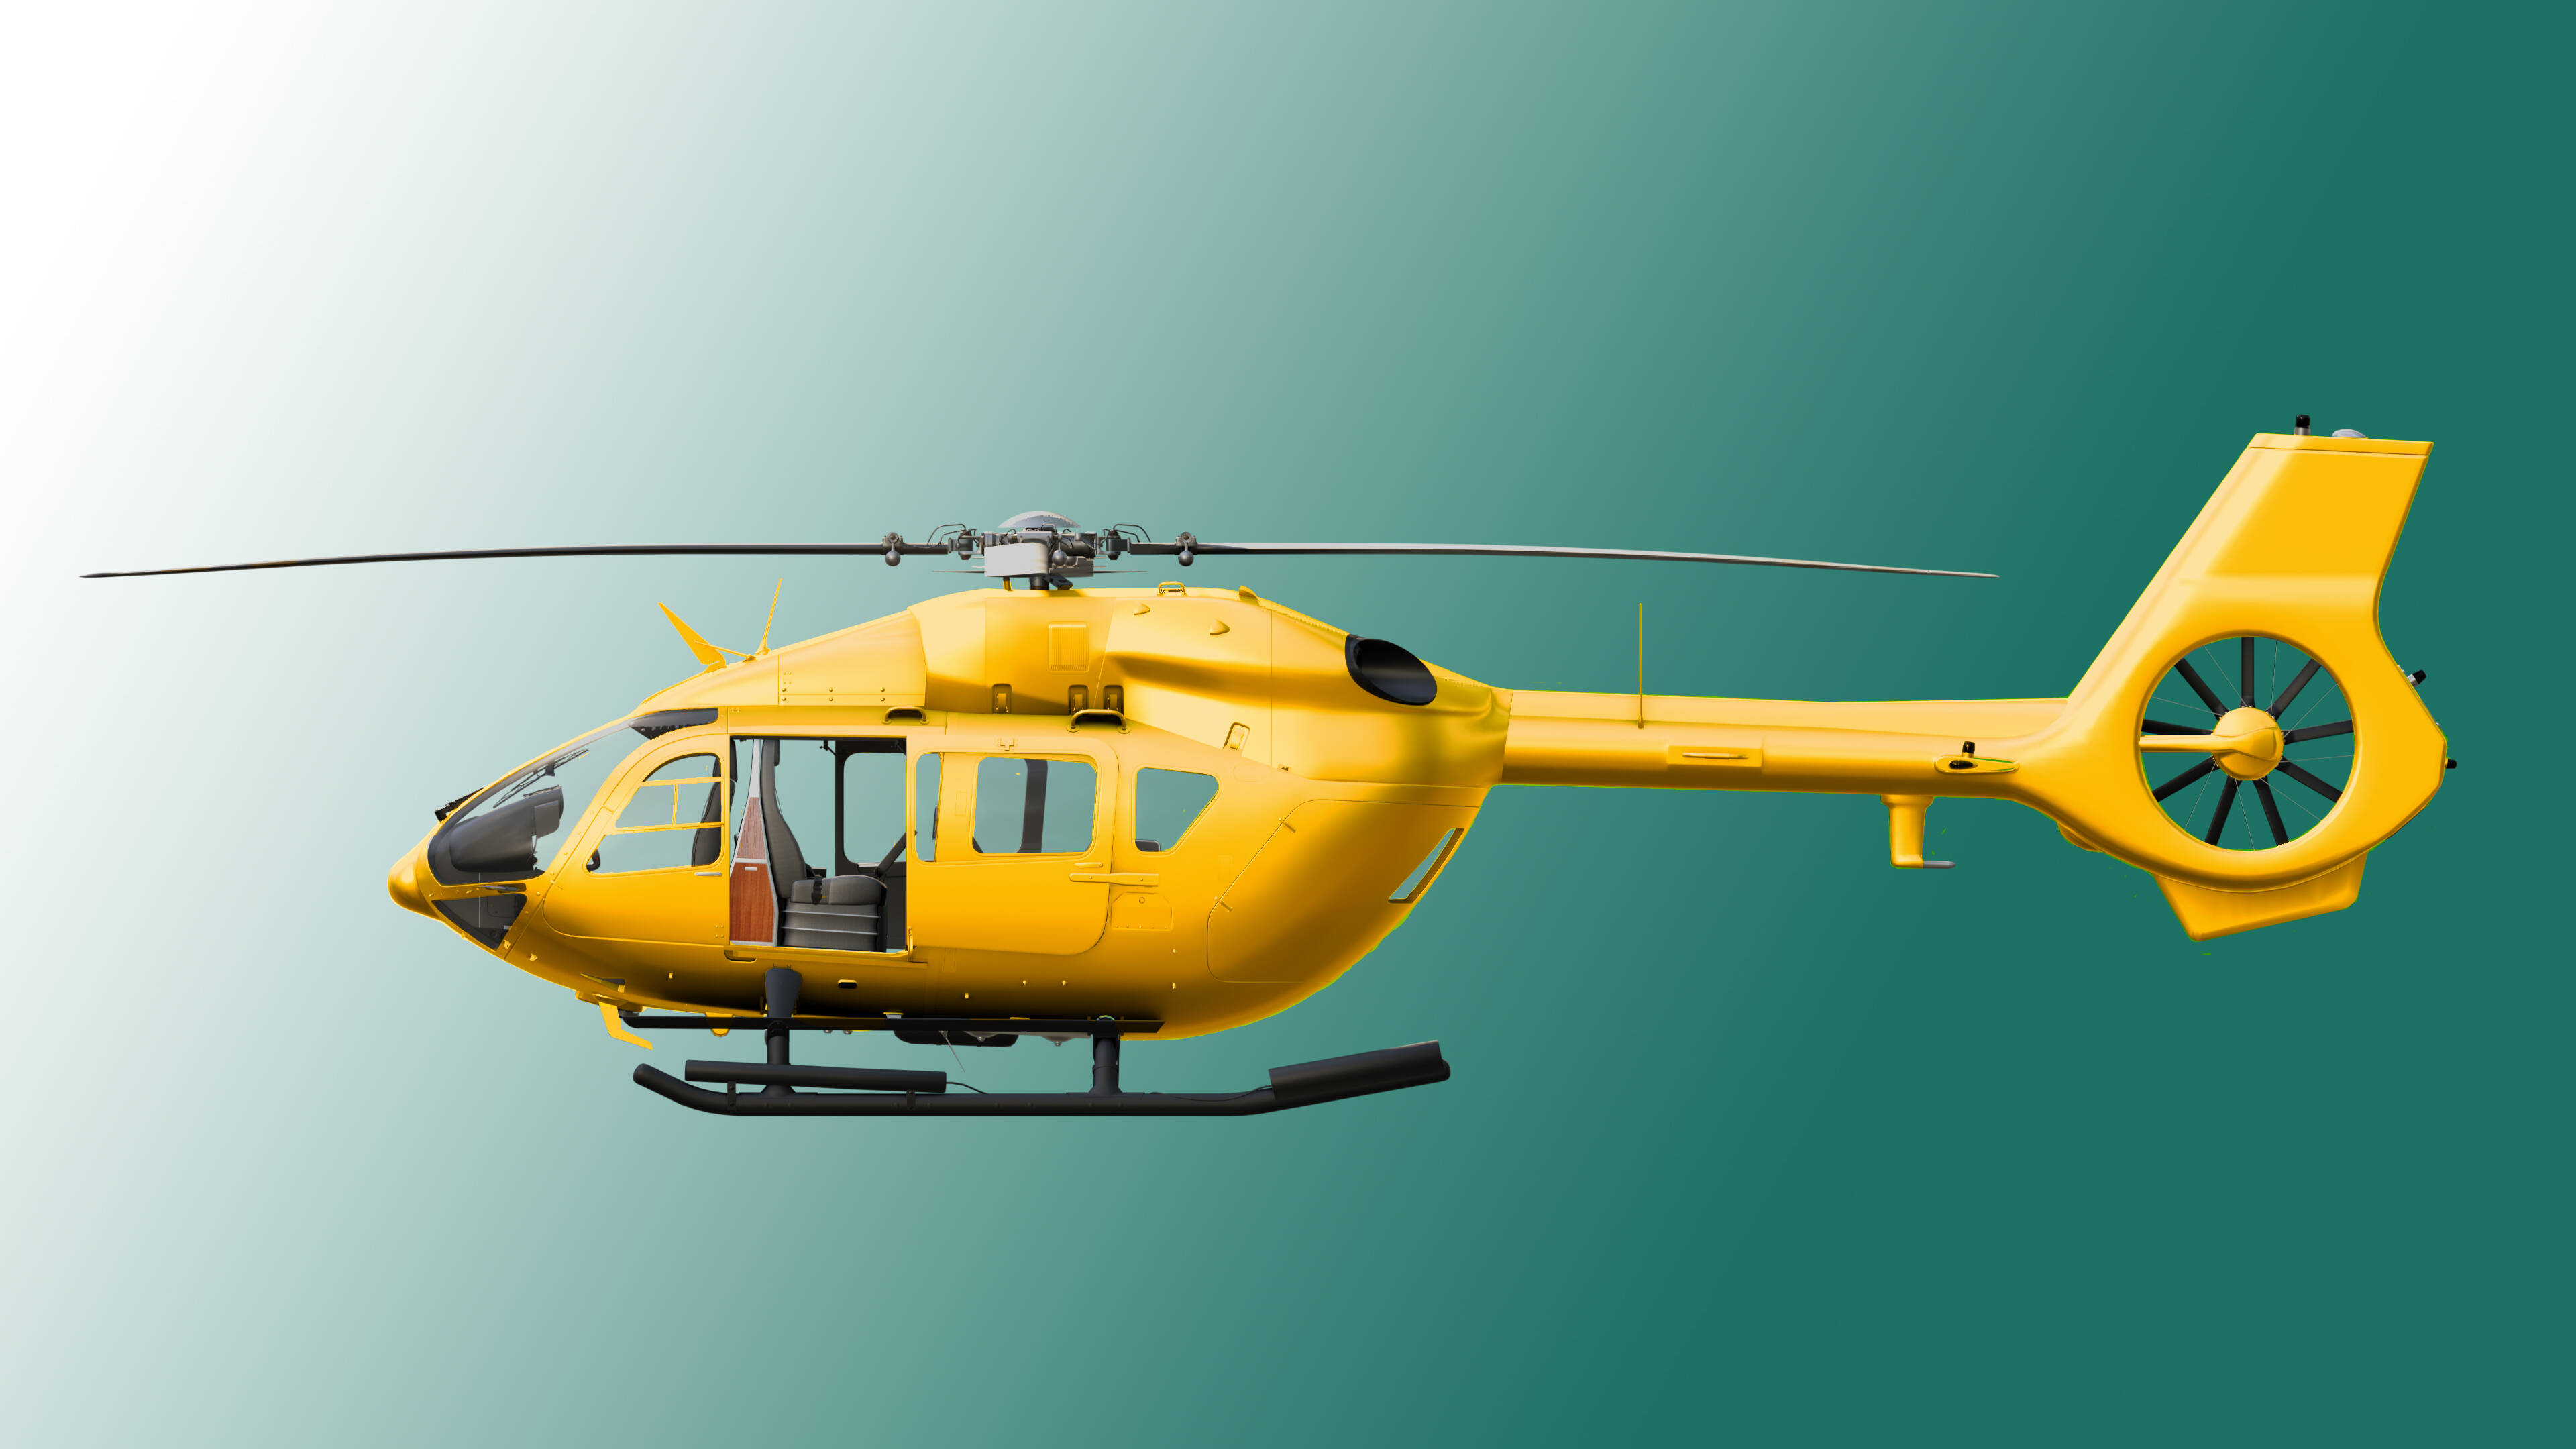 Helicopters for Microsoft Flight Simulator, MSFS